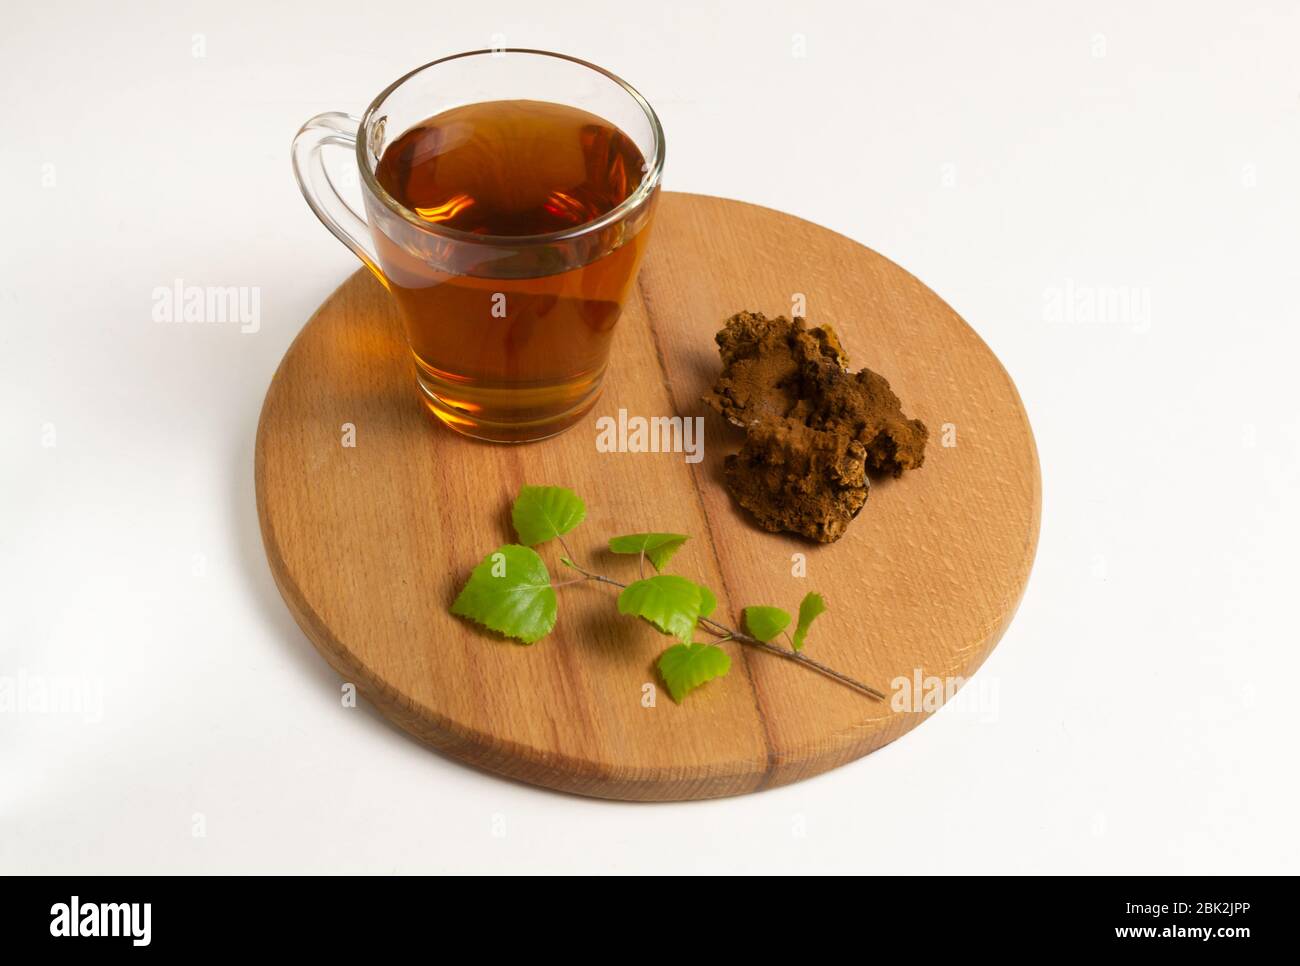 A cup of tea chaga with mushroom and a birch branch on a round wooden board. Stock Photo